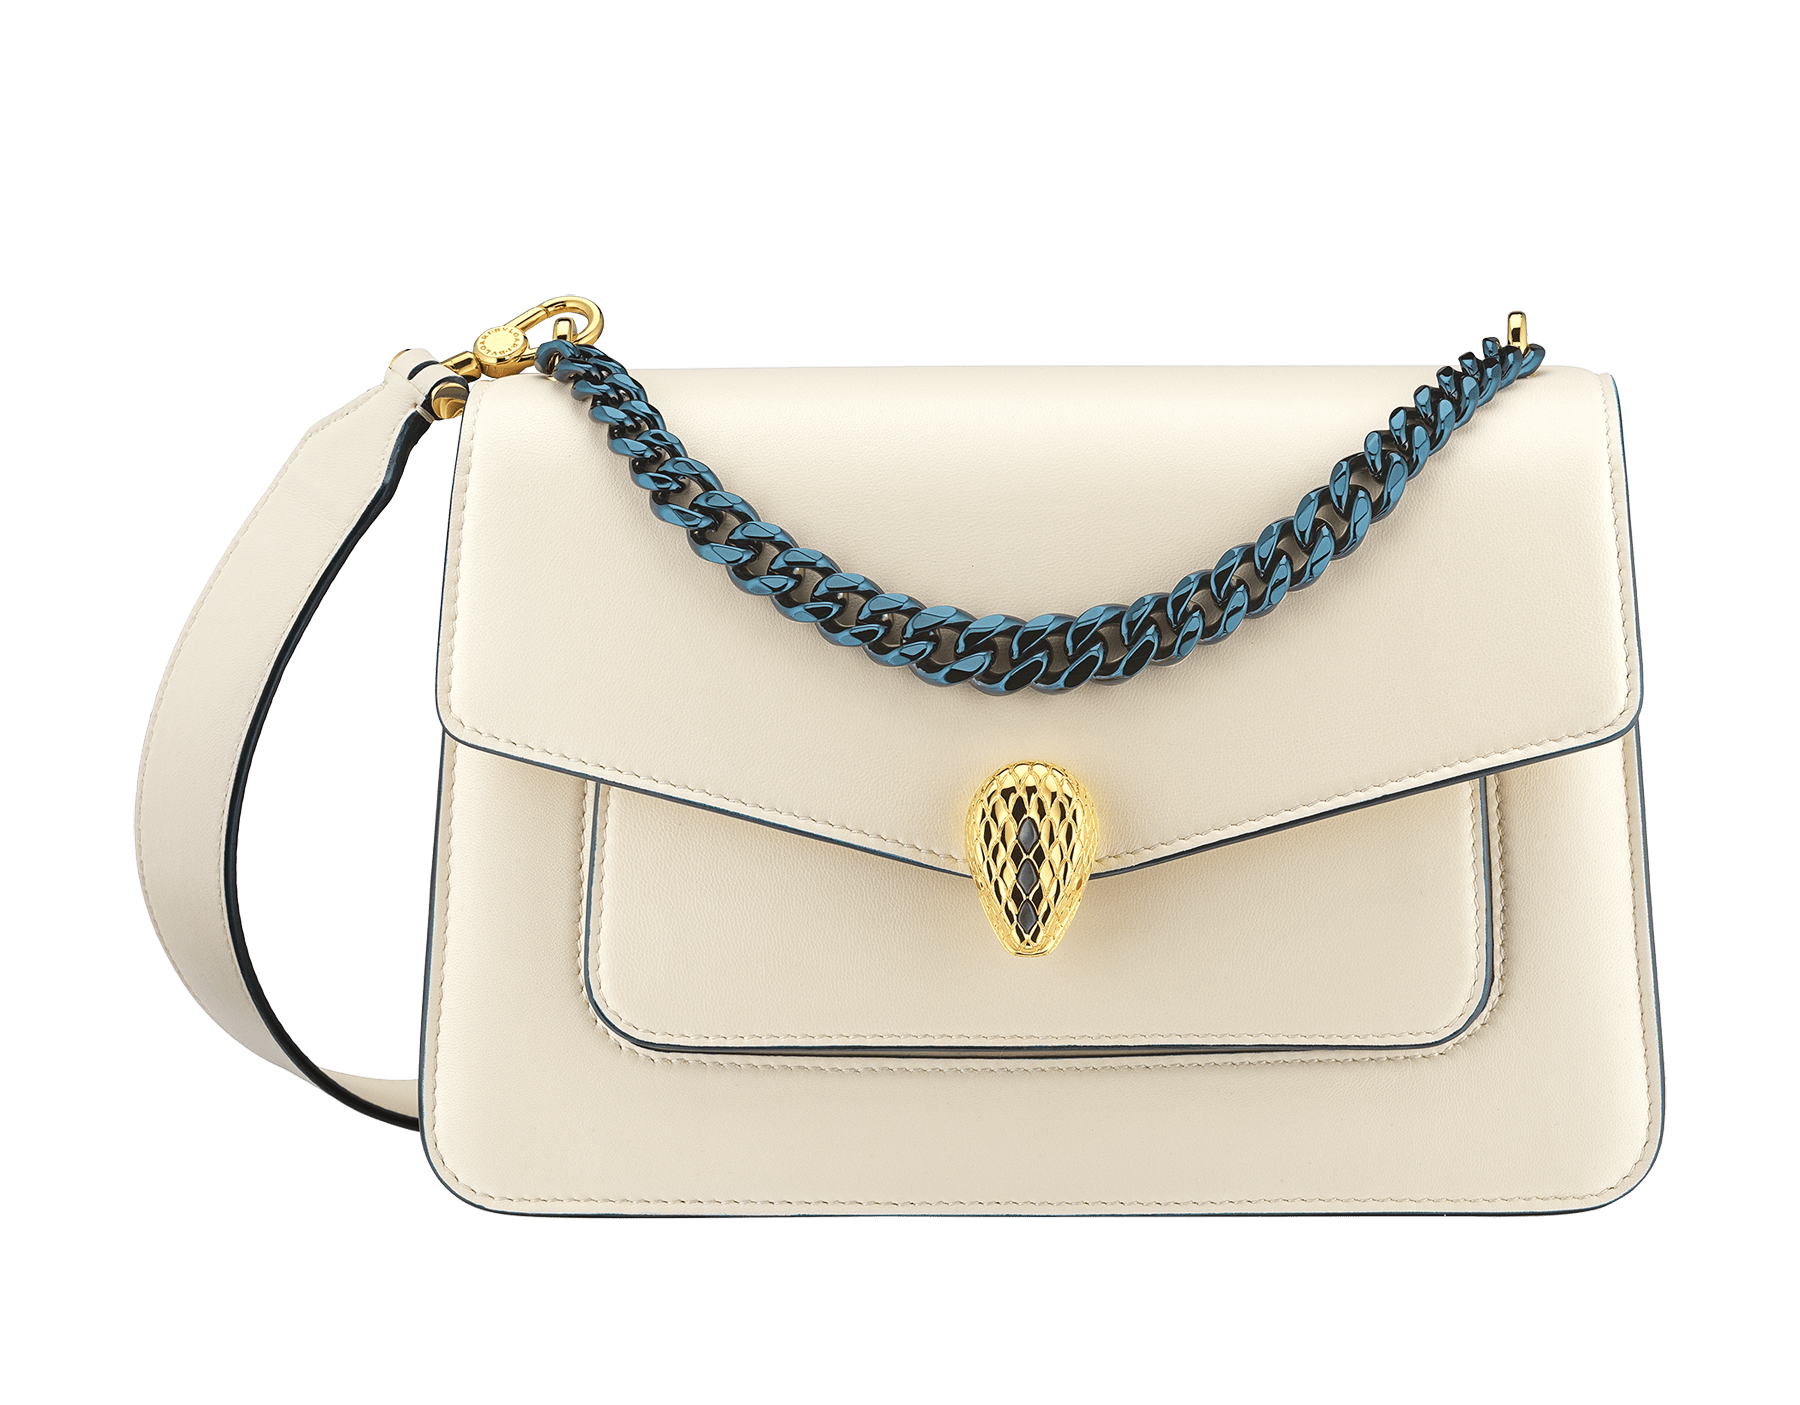 "Serpenti Forever" maxi chain crossbody bag in Ivory Opal white nappa leather, with an Deep Garnet bordeaux nappa leather internal lining. New Serpenti head closure in gold-plated brass, finished with small grey mother-of-pearl scales in the middle, and red enamel eyes. 1138-MCNb image 1